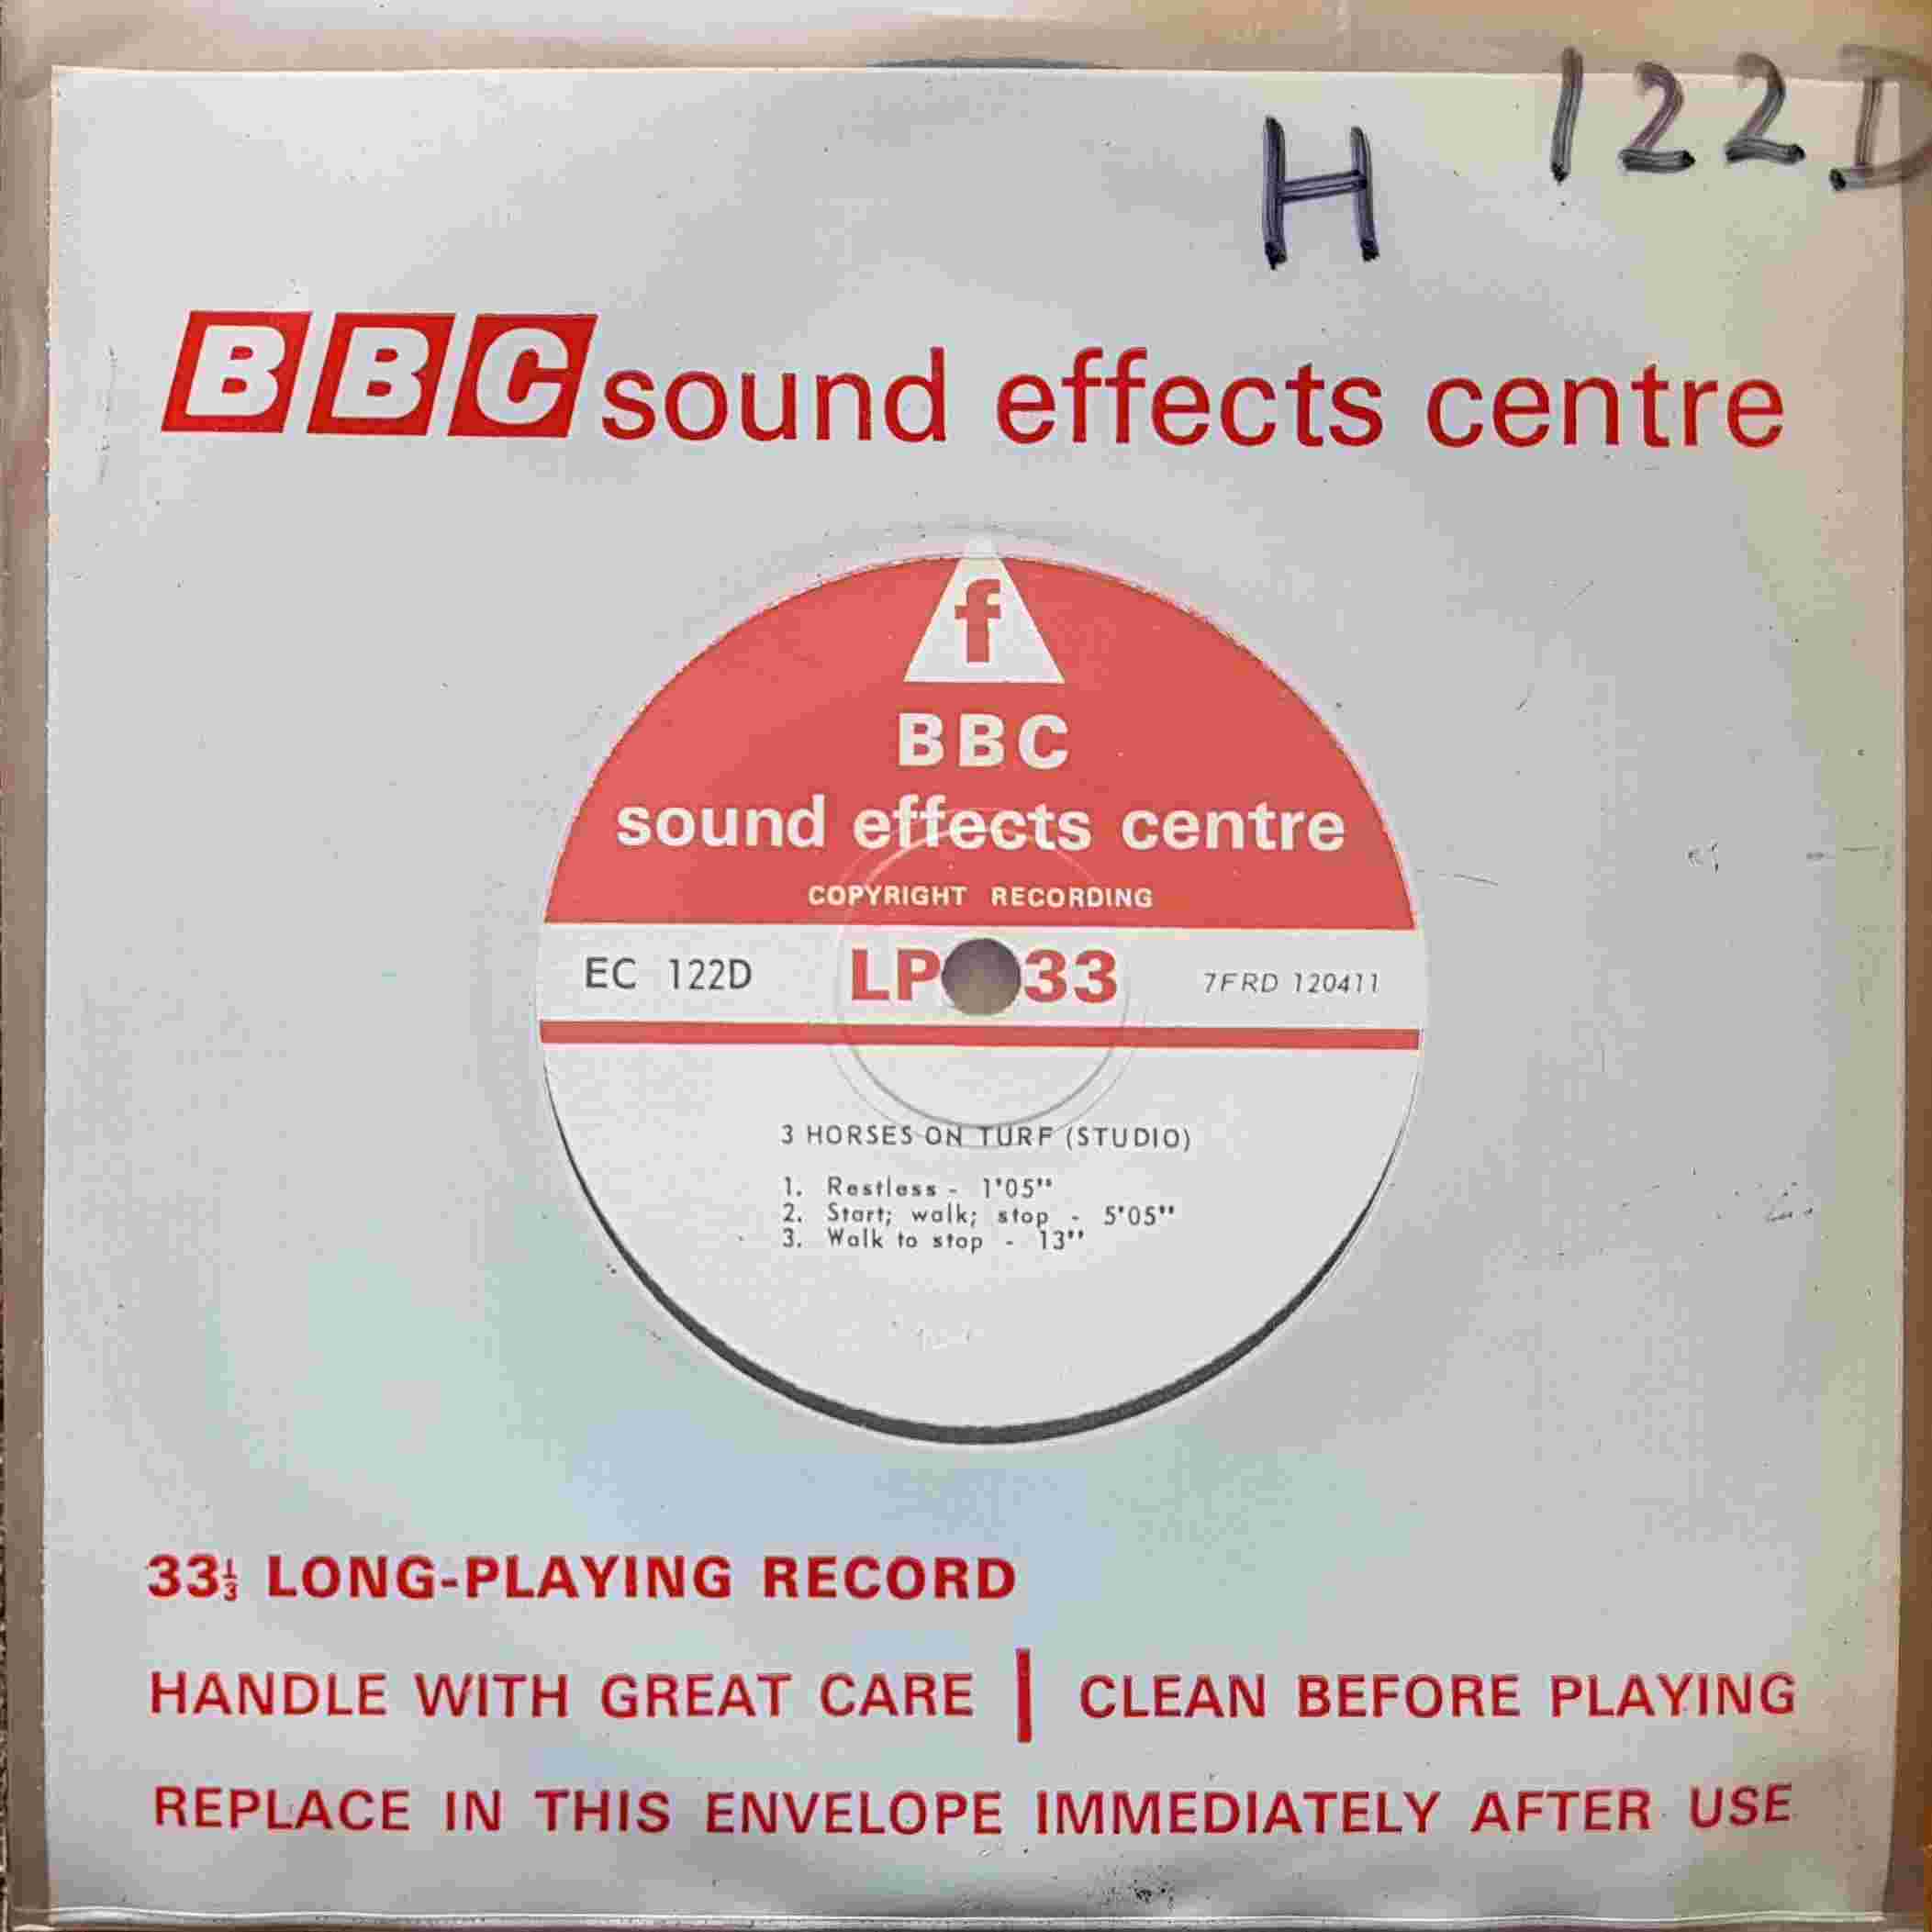 Picture of EC 122D 3 Horses on turf (Studio) by artist Not registered from the BBC singles - Records and Tapes library